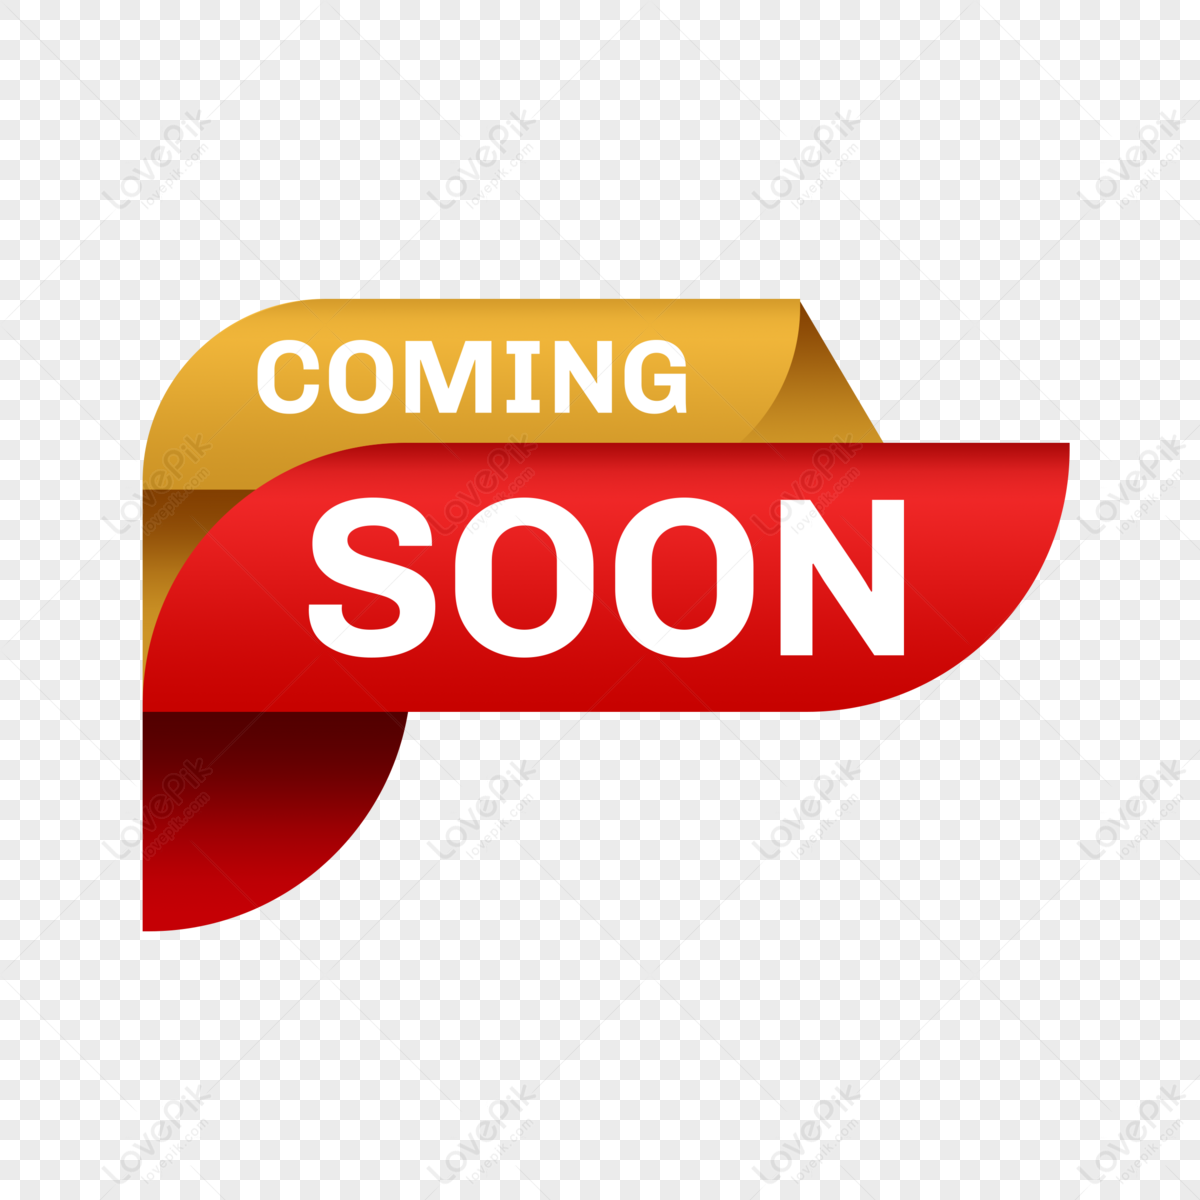 Coming Soon Poster Vector Hd Images, Coming Soon Transparent Background  Modern Style, Coming Soon Png, Coming Soon Clipart, Coming Soon Vector PNG  Image For Free Download